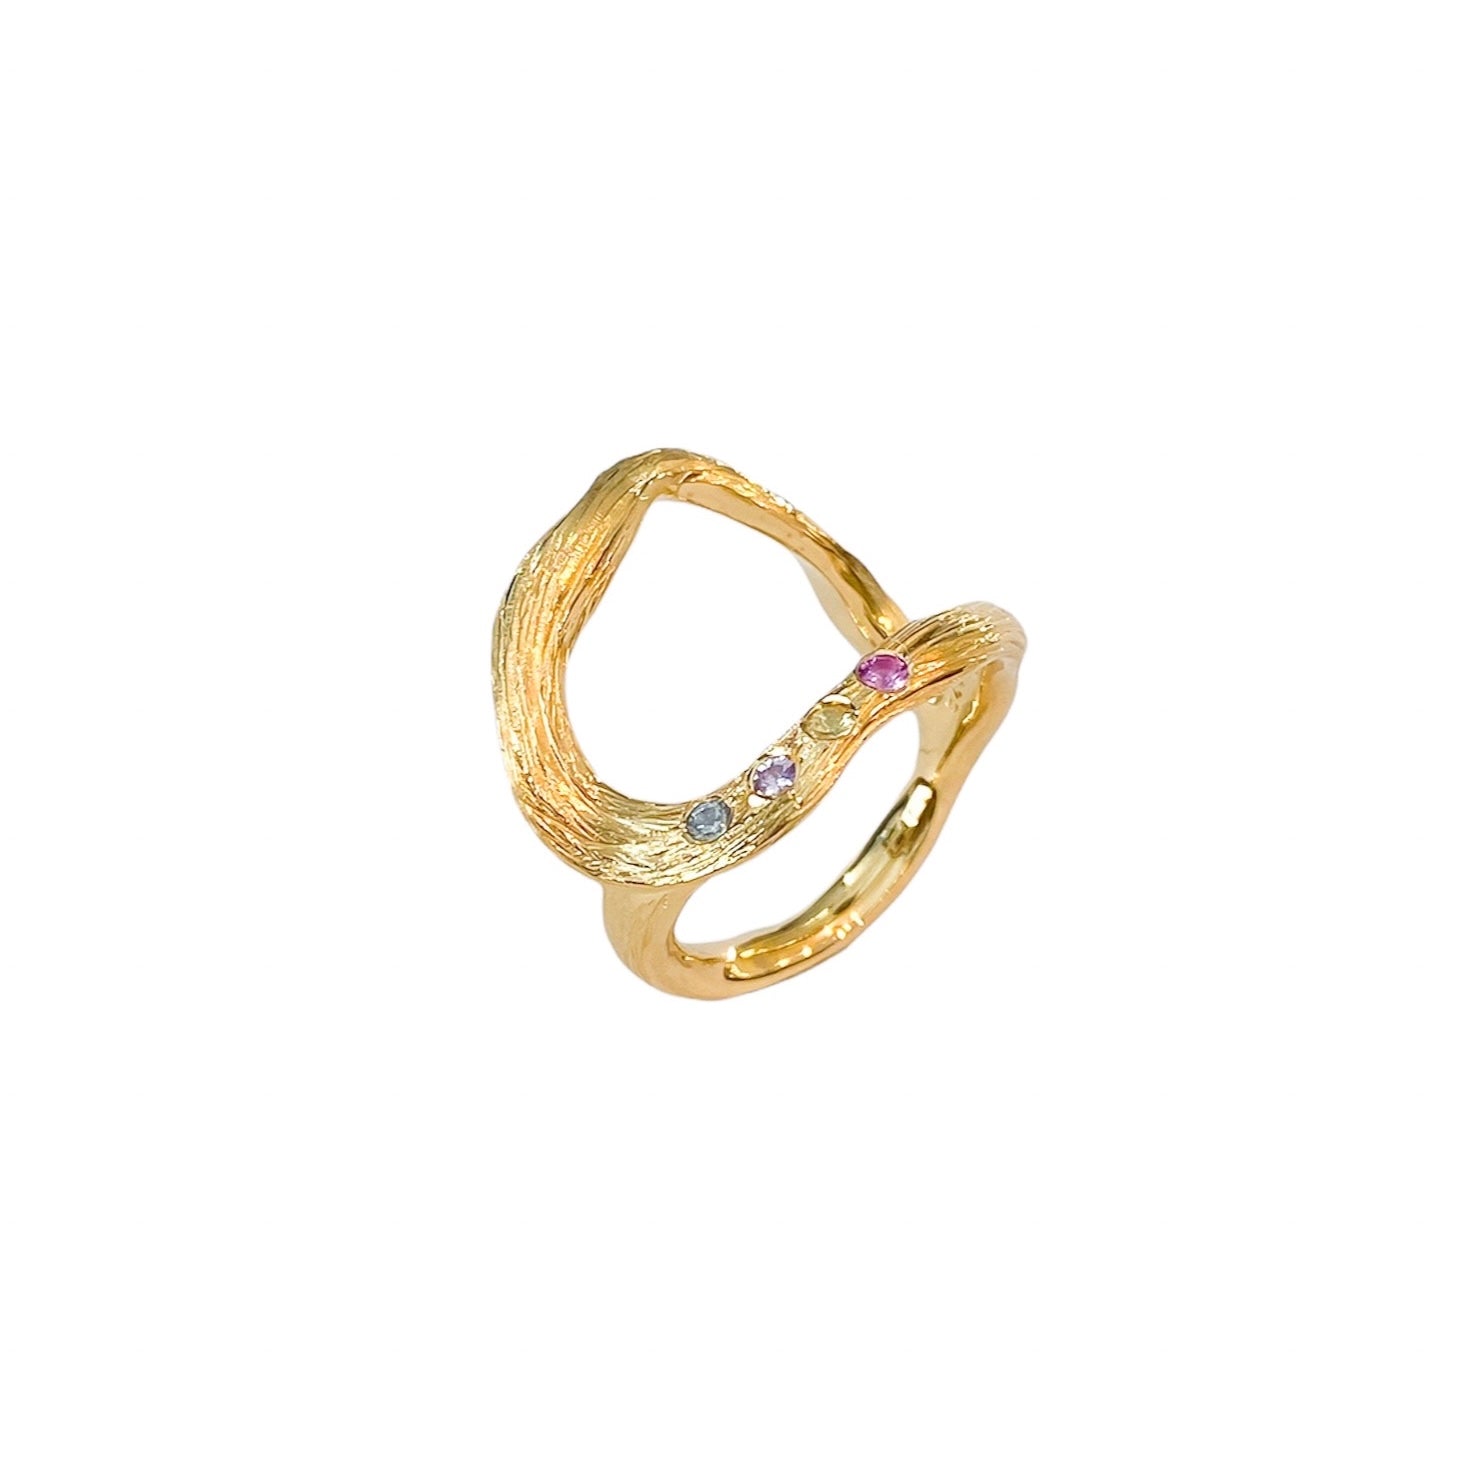 Simone Noa Oceania gold plated silver ring, left side view.